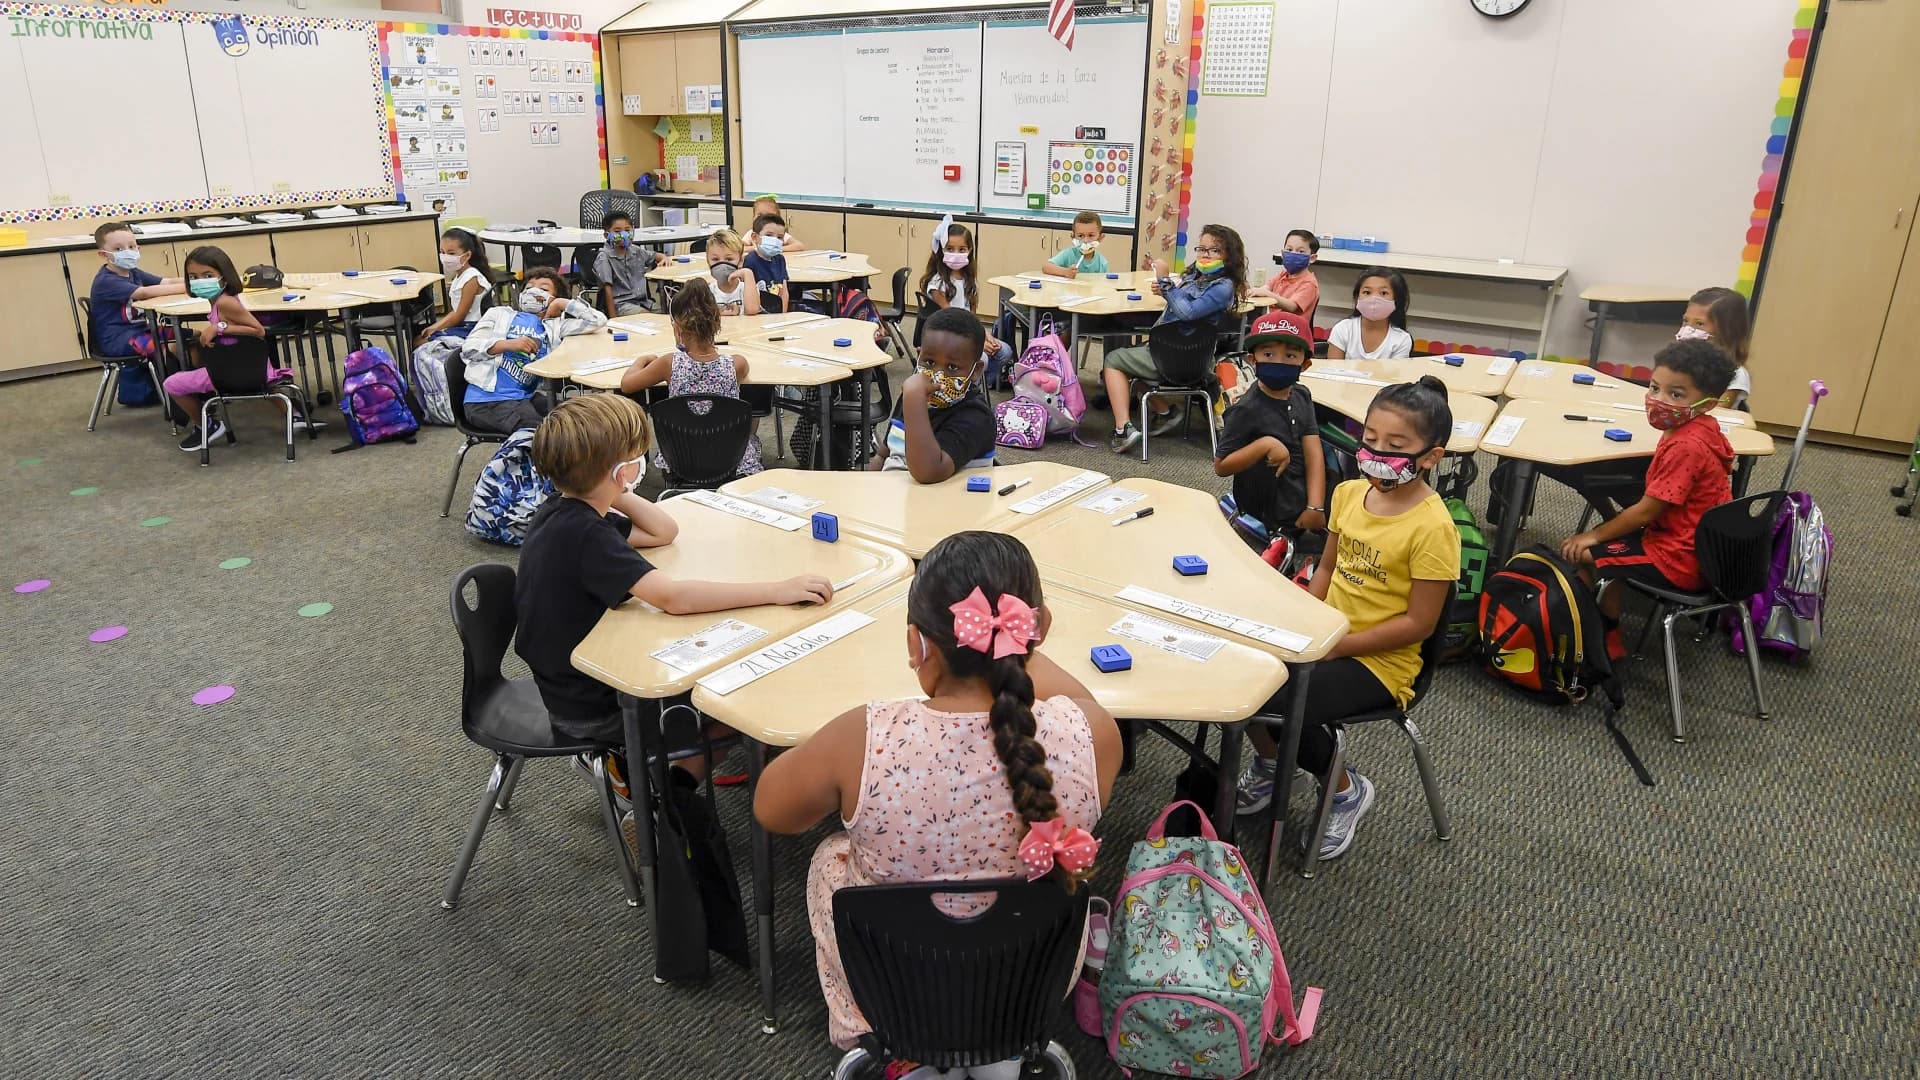 Where do some Hudson Valley school districts stand when it comes to wearing masks?